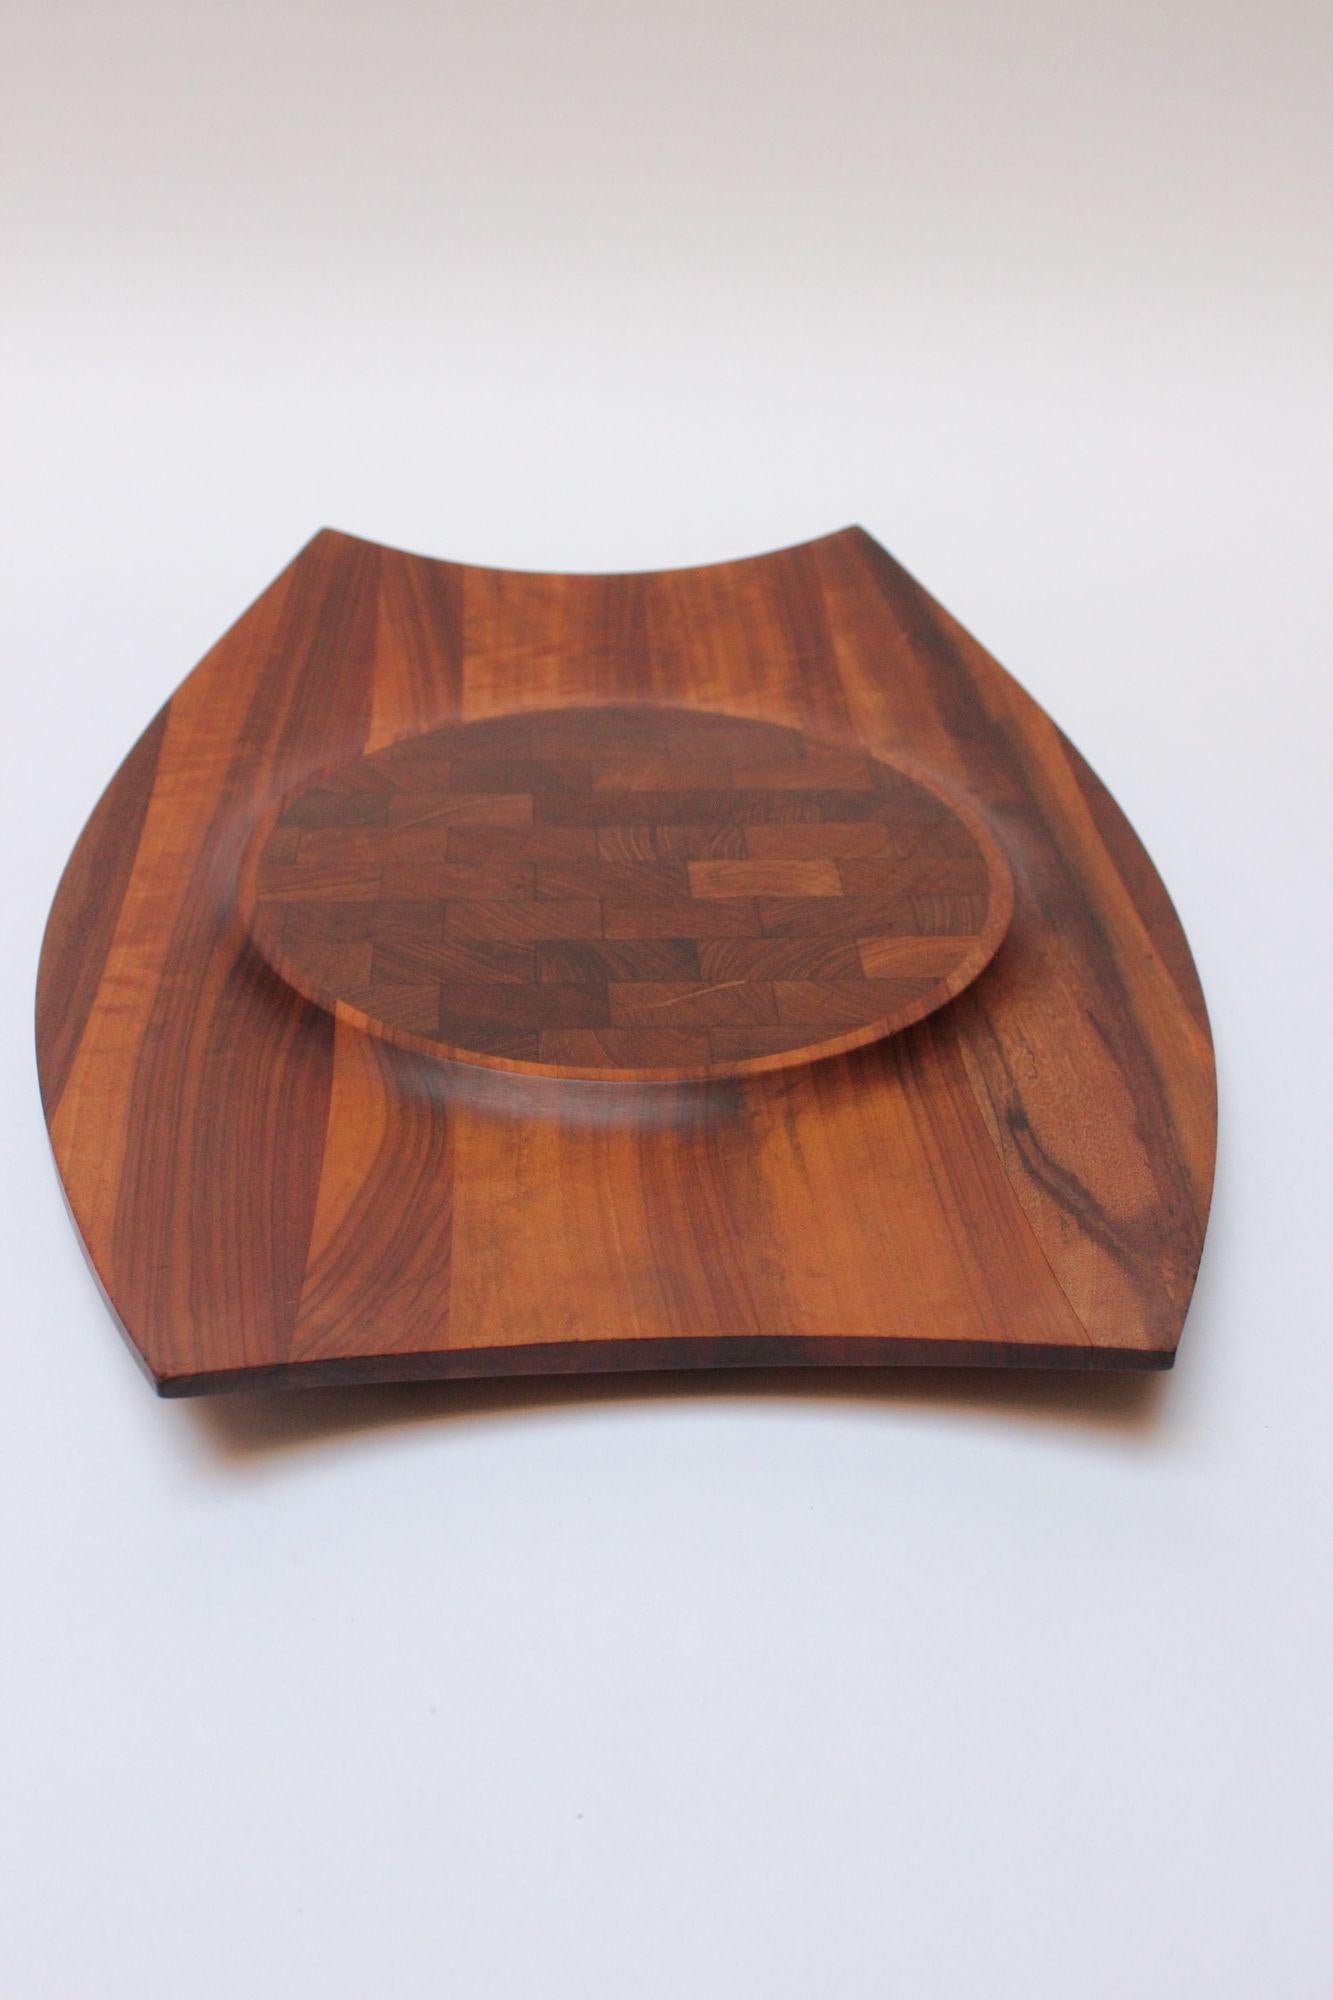 Sculptural mutenye tray with cutting board insert designed by Jens Quistgaard for Dansk Designs Denmark as part of his 